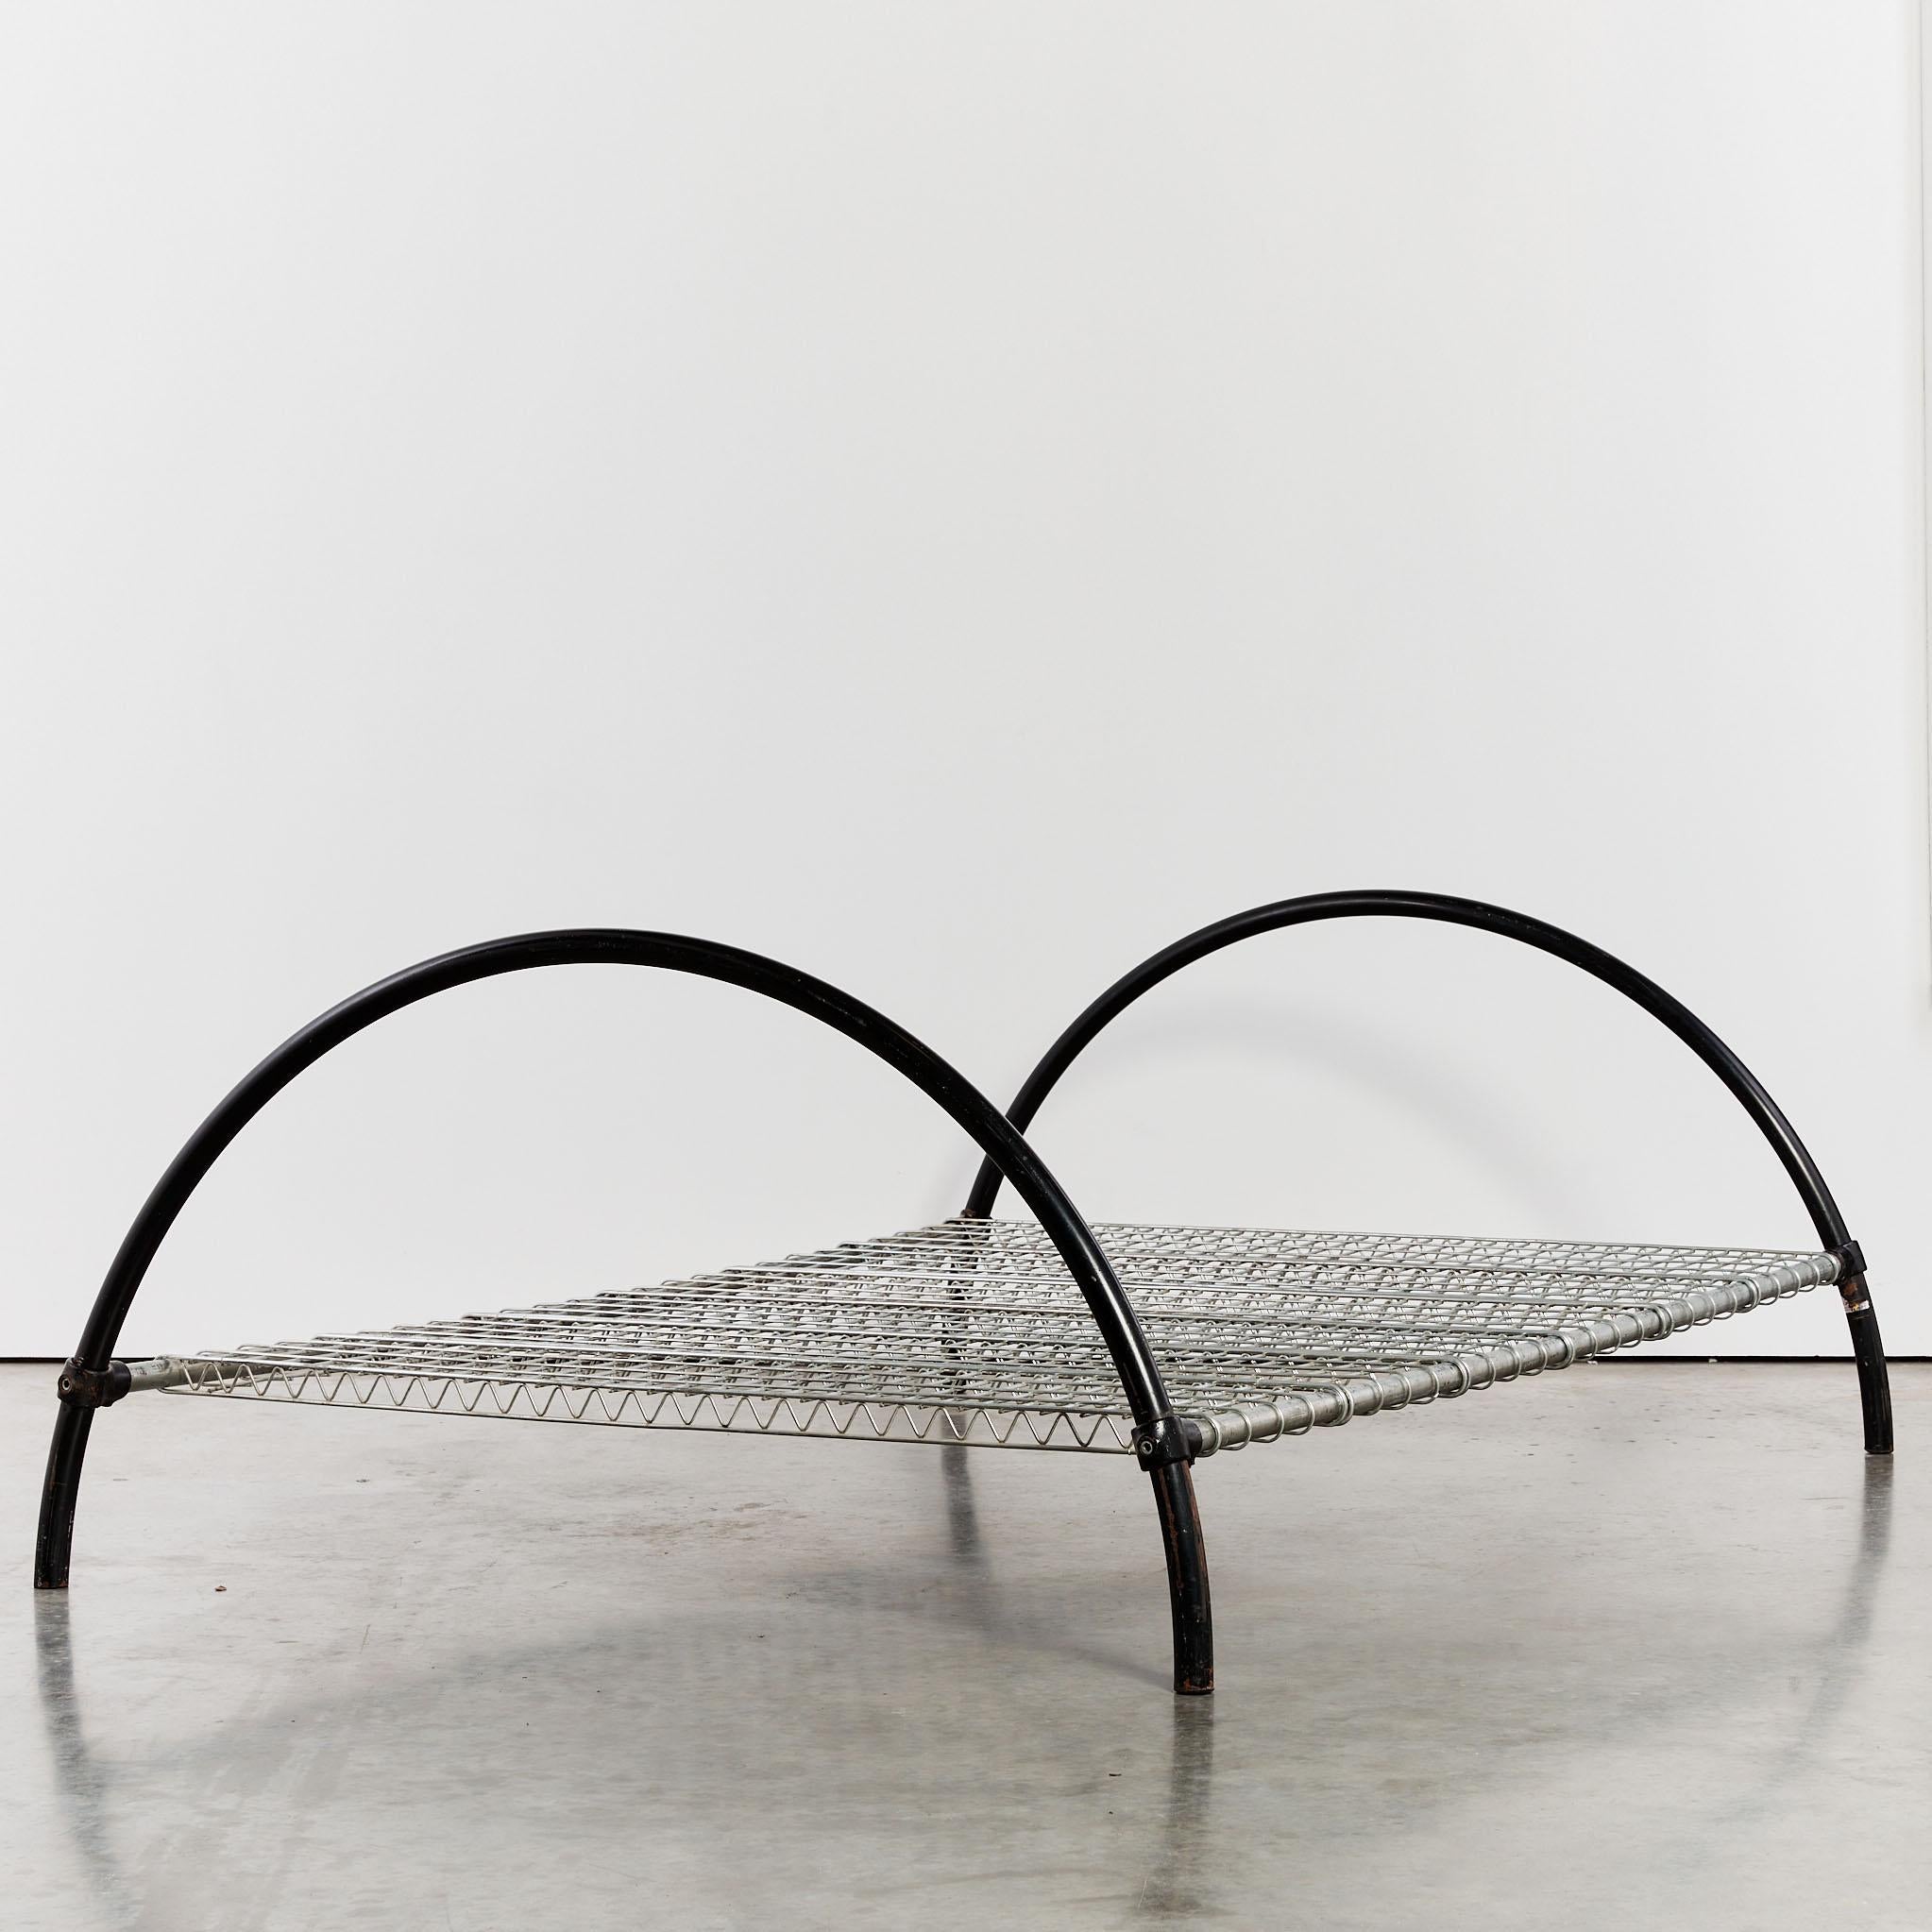 Round Rail bed by designer Ron Arad in double size, with enamelled tubular steel, wire-mesh panels, kee-klamps and six strut horizontal supports.

Ron Arad, RDI is a British-Israeli industrial designer, artist, and architectural designer. Born in